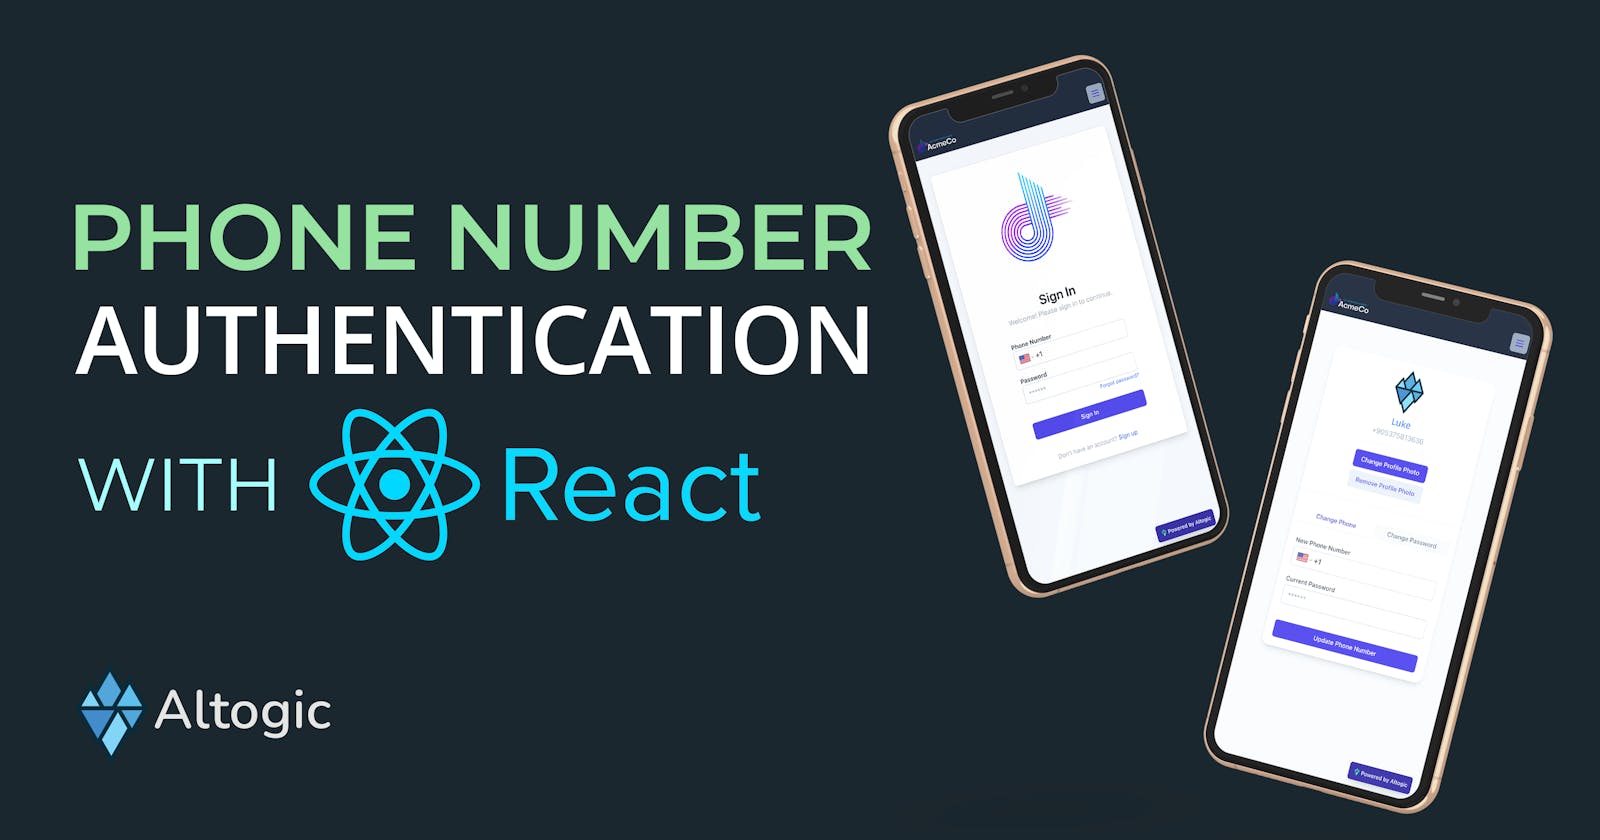 How to build Phone Number-Based Authentication with React & Altogic and Twilio